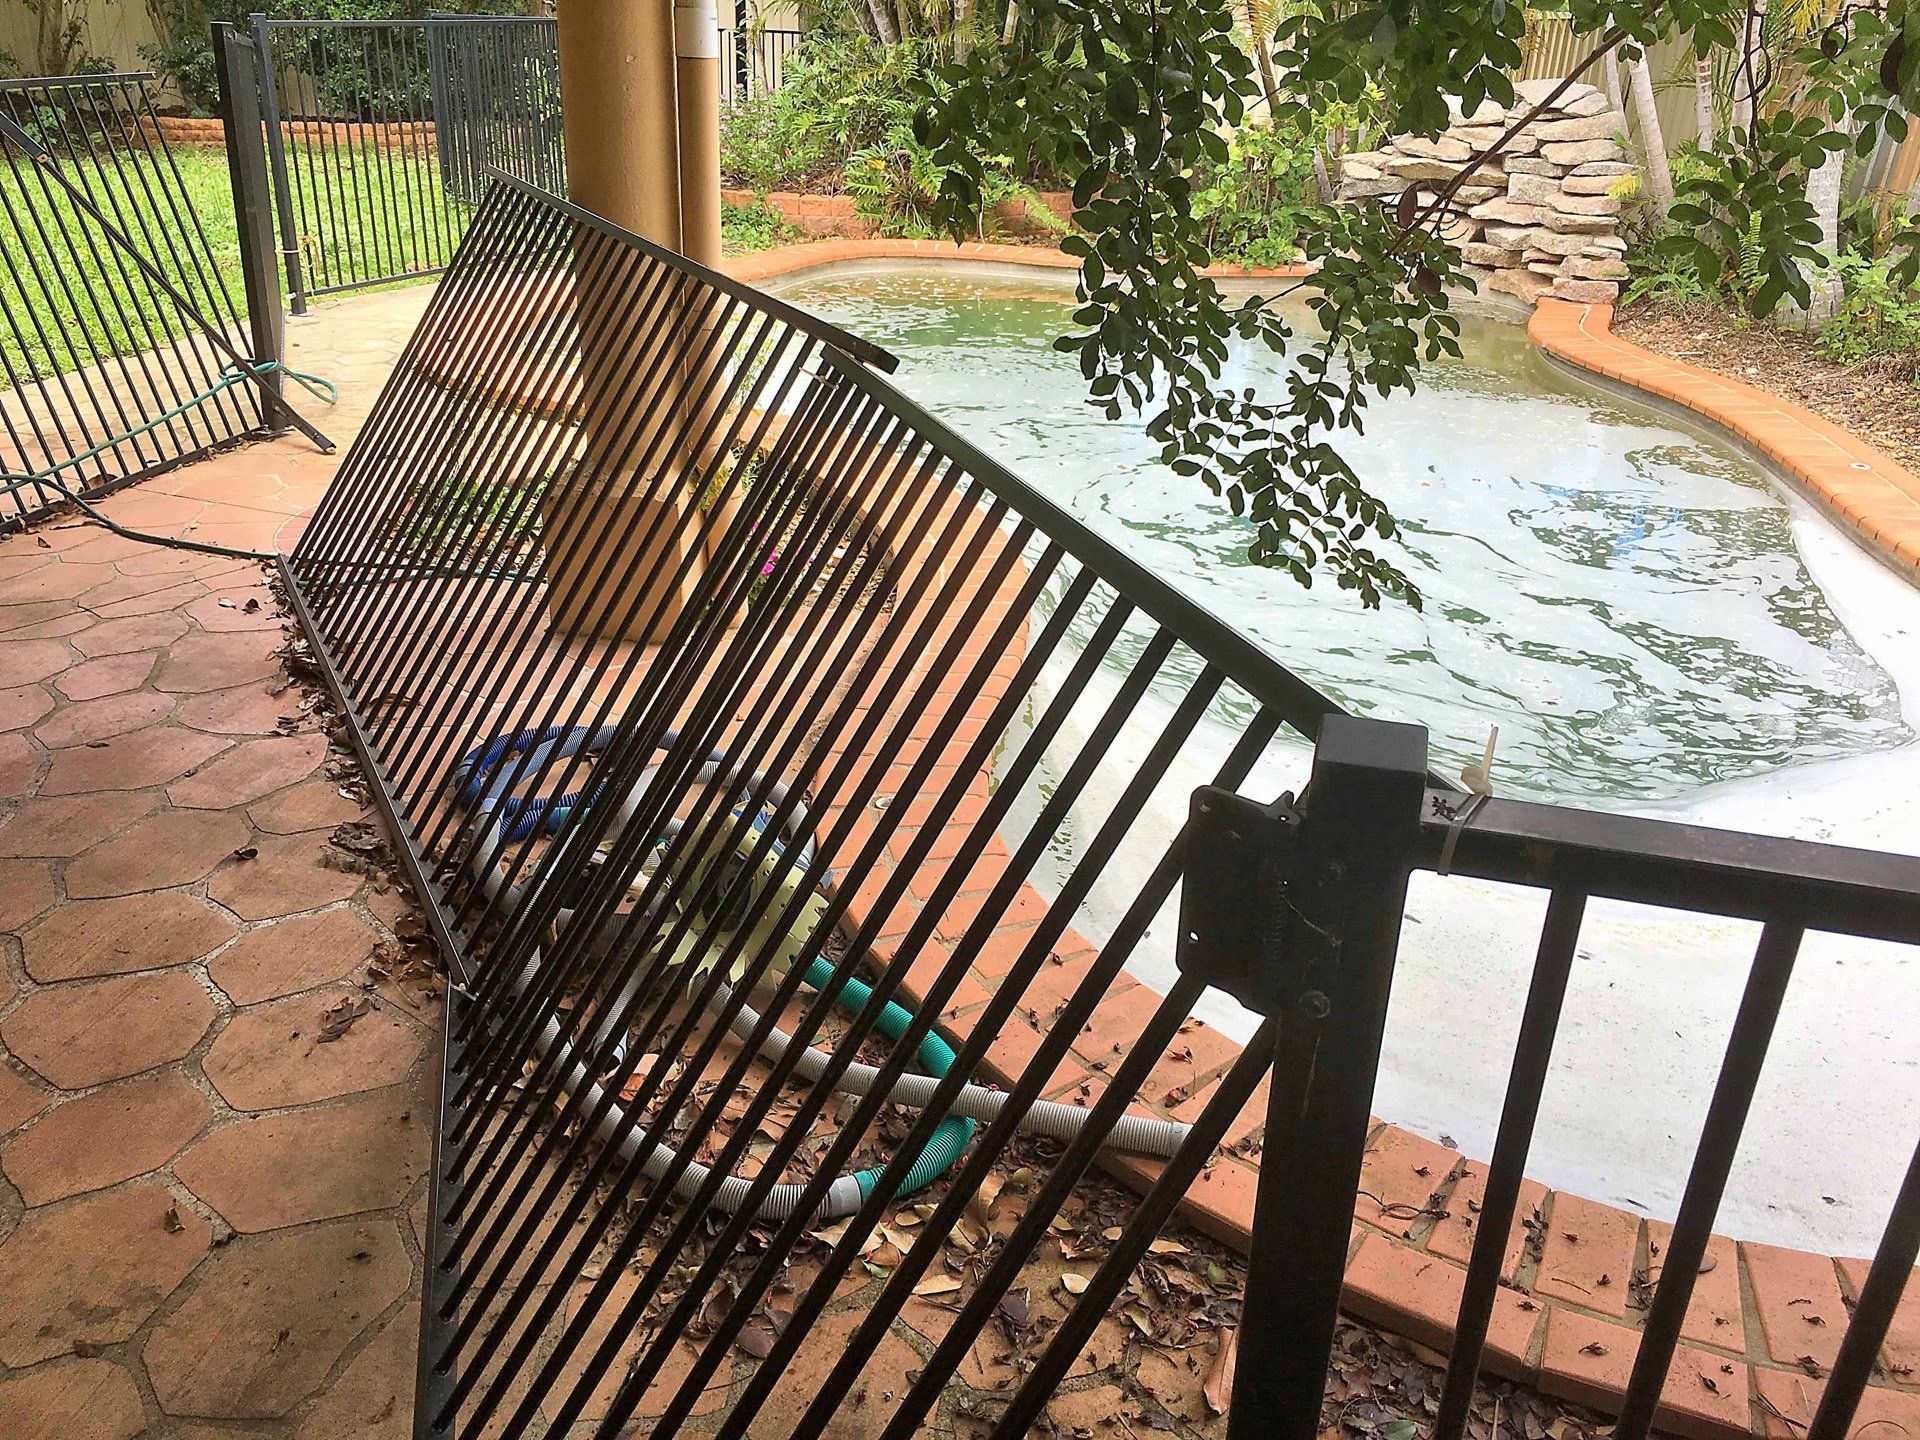 Wrought iron fencing repairs